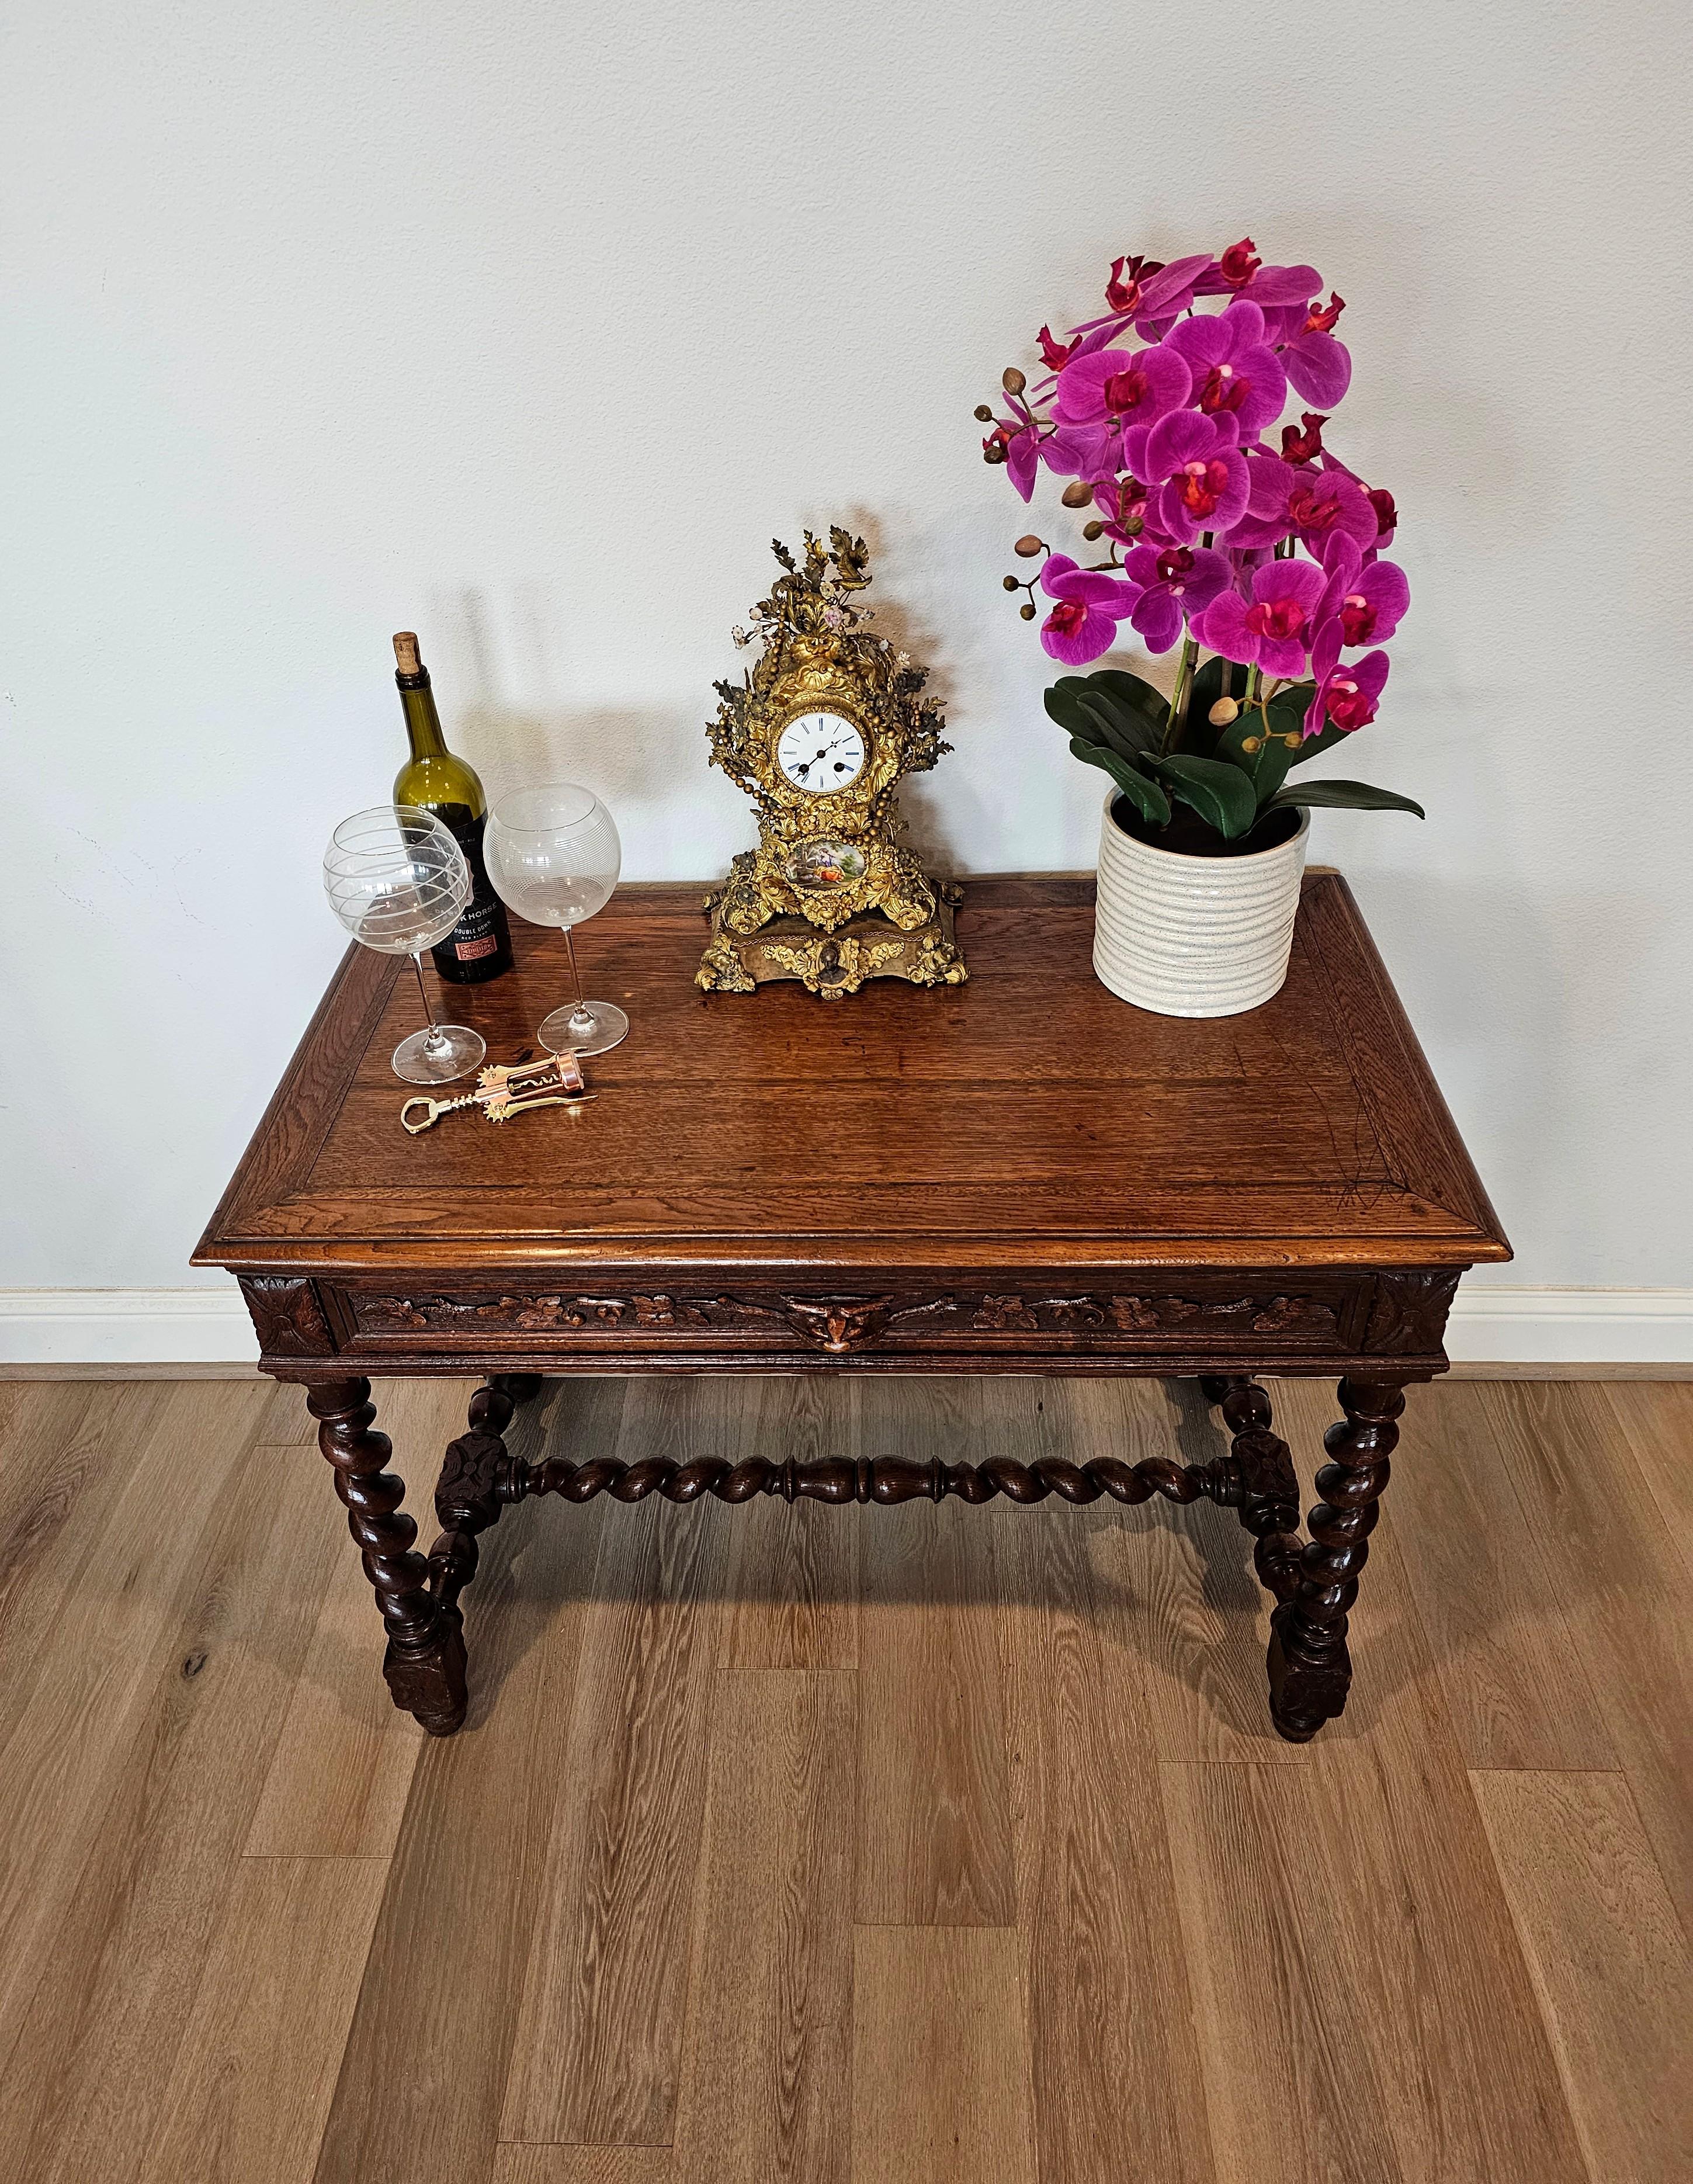 Antique French carved oak writing table with beautifully aged warm rustic patina. circa 1860

Born in France in the 19th century, hand-crafted of solid oak, exceptionally executed in Italian Renaissance influenced early 17th century King Louis